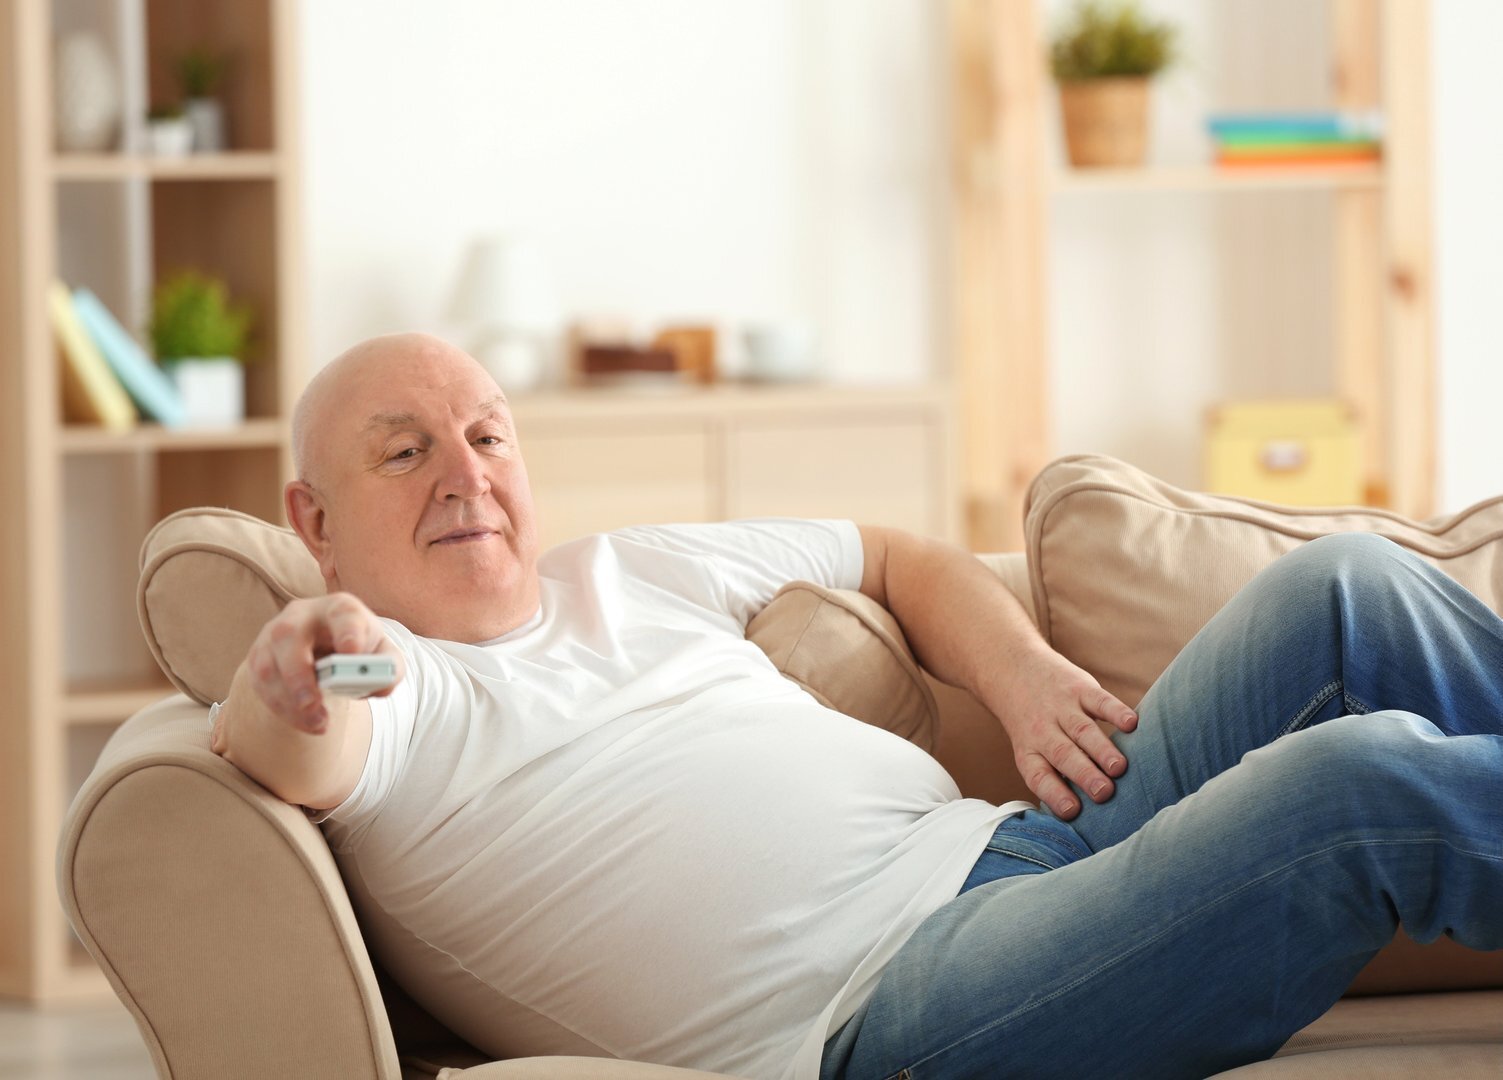 Moving off the couch brings healthy aging Study finds benefit